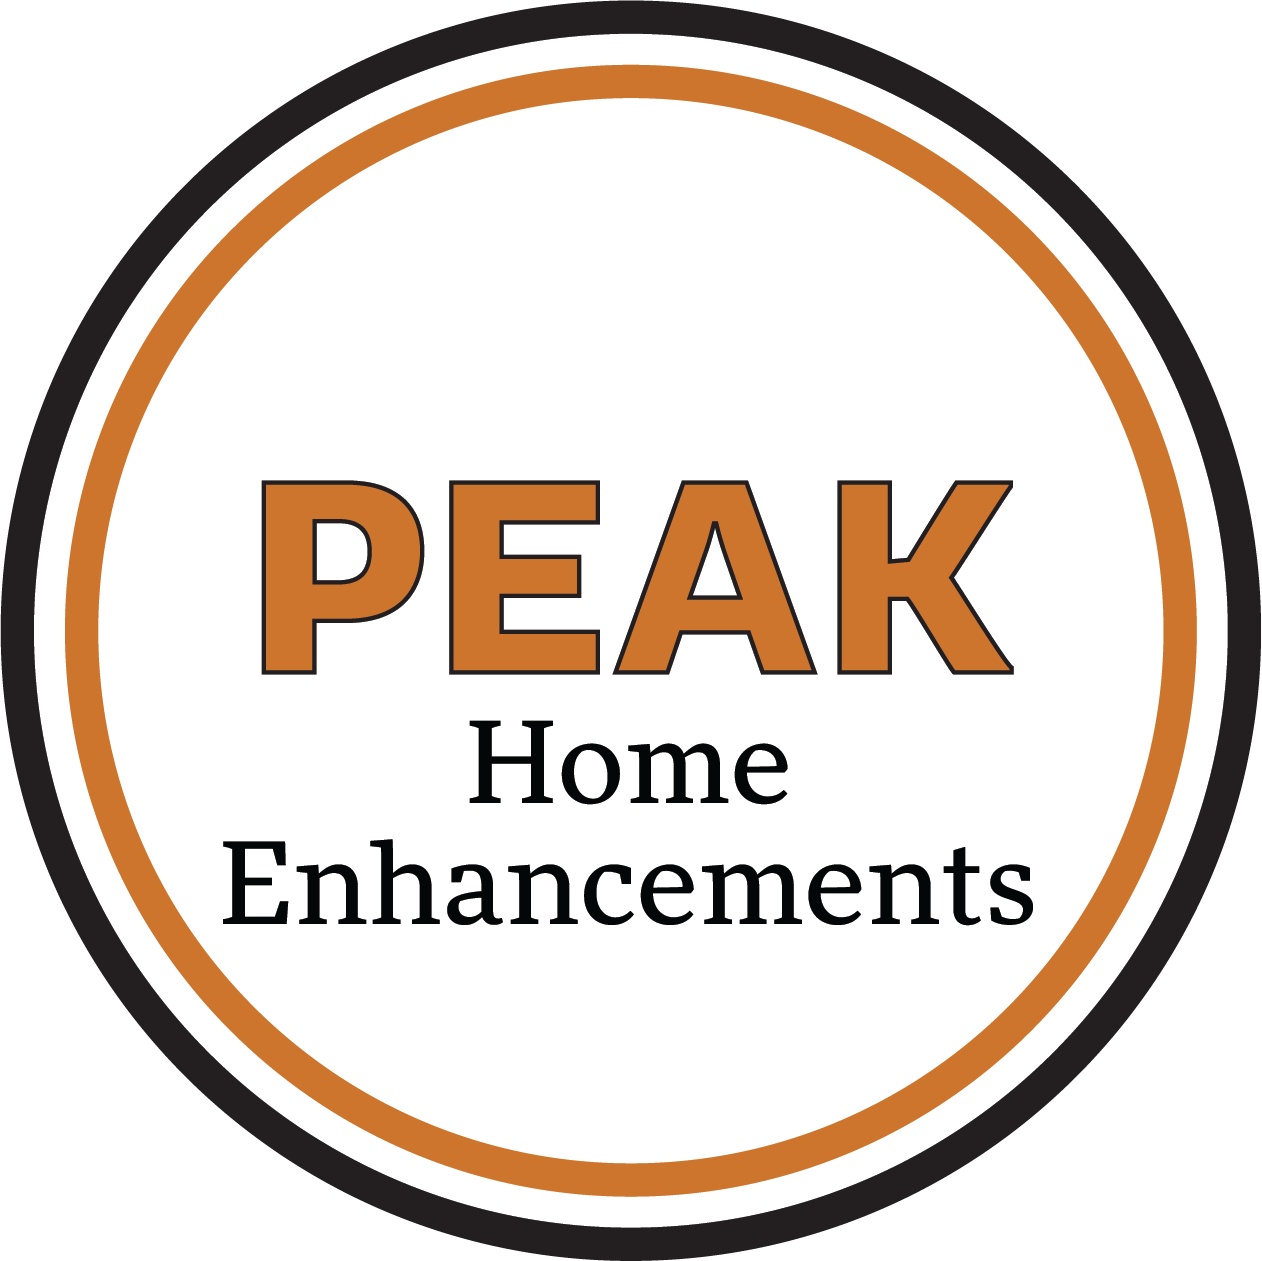 Peak Home Enhancements | Home Remodeling Renovations Madison Wisconsin